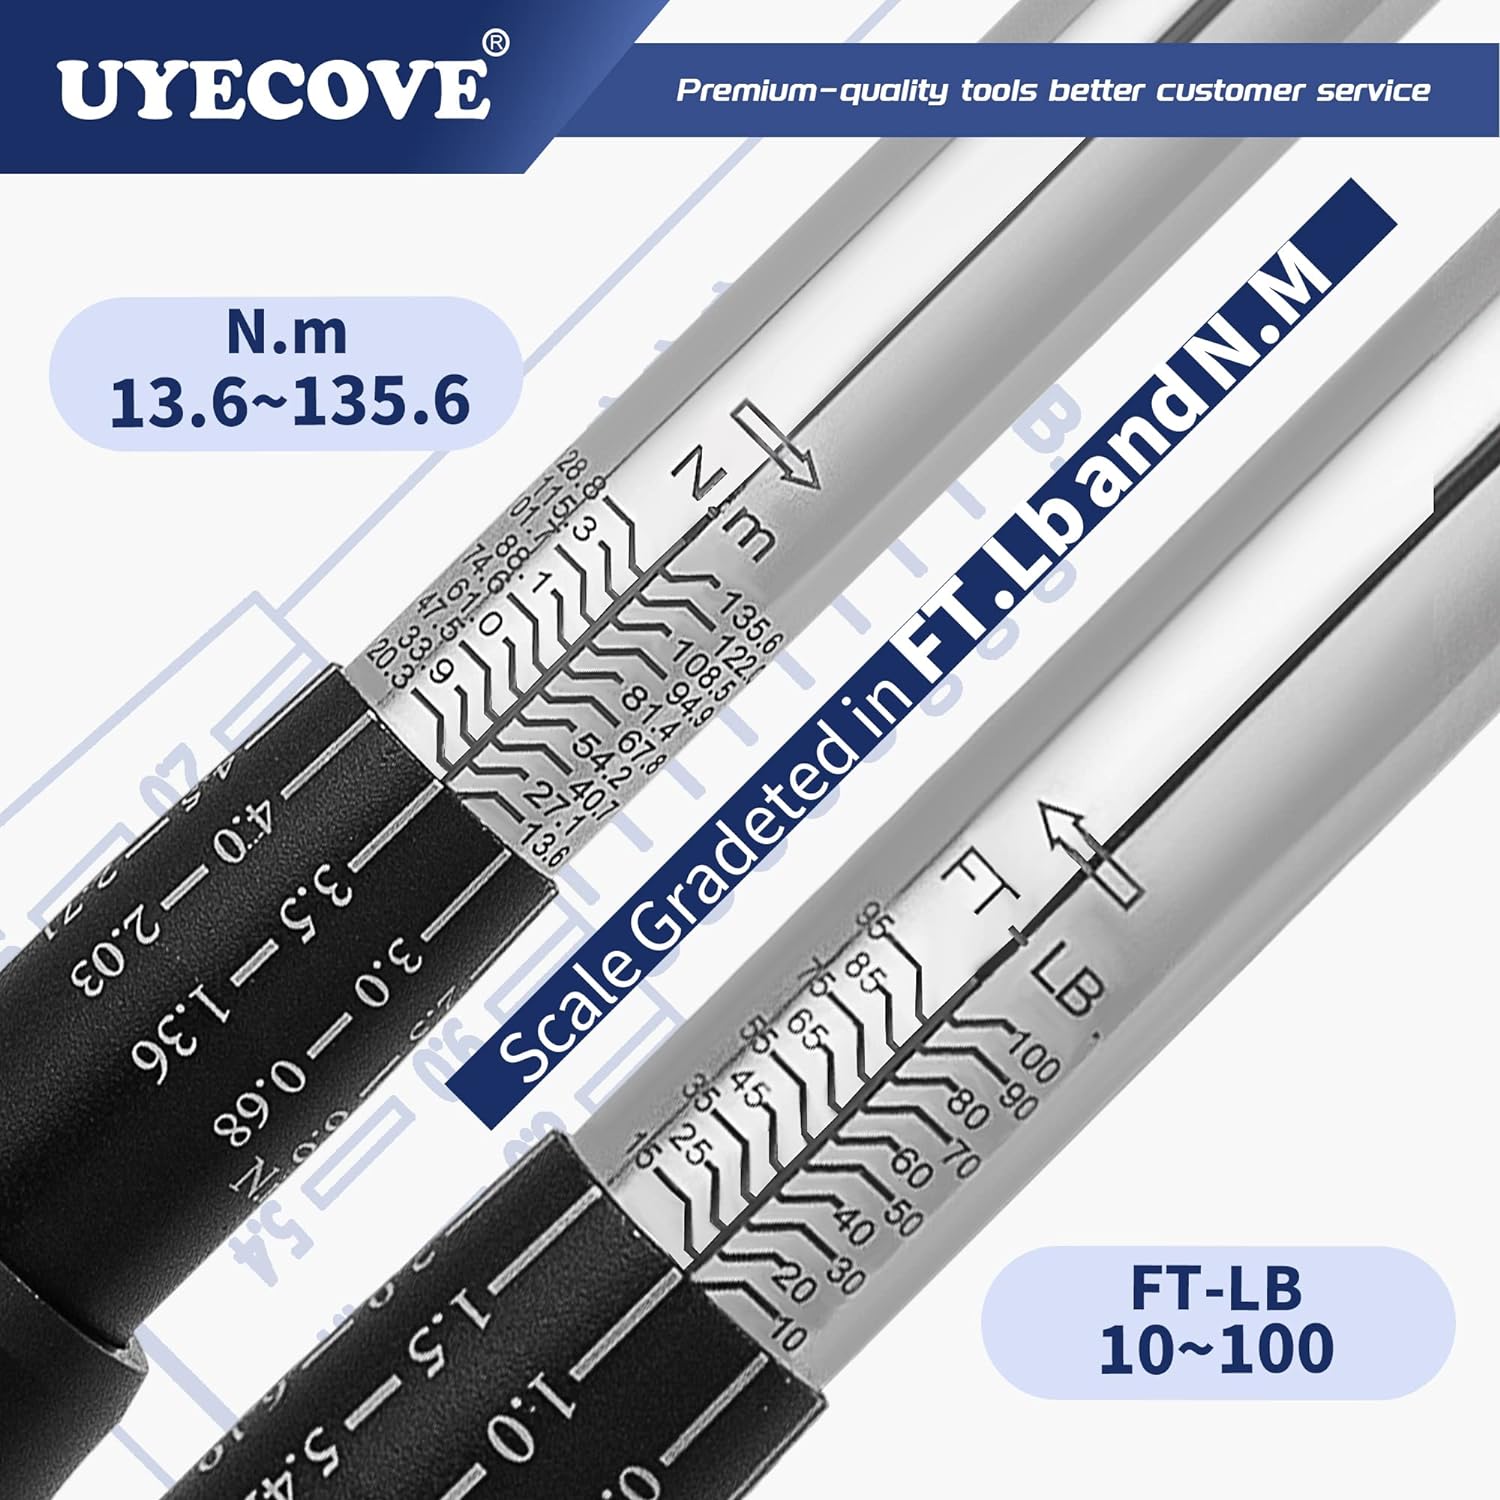 UYECOVE 3/8-Inch Drive Click Torque Wrench 4 Pcs Set, 10~100FT/13.6-135.6N.m, with 3/8'' extention bar, 3/8'' to 1/2'' adaptor and 3/8'